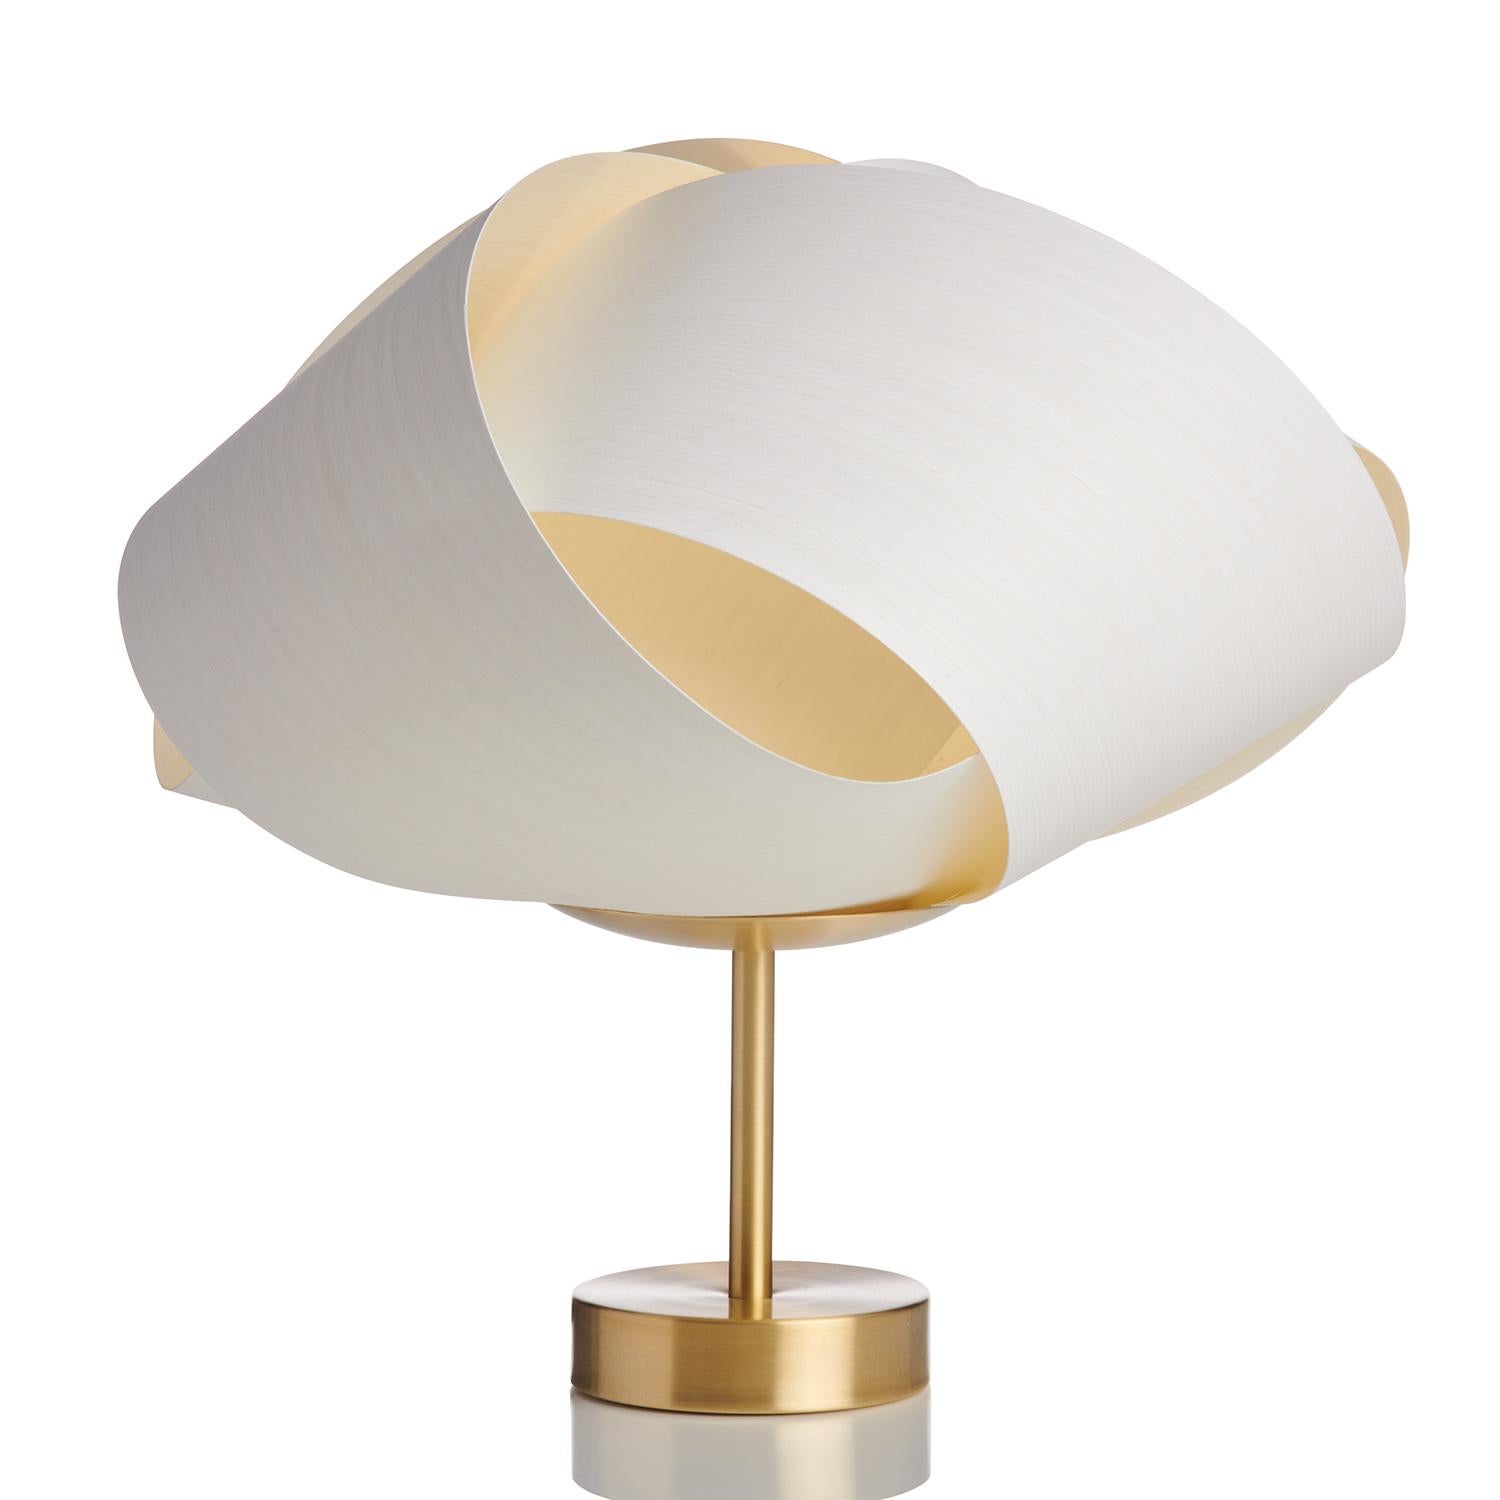 FLEUR is a Danish Modern wood veneer side light. This small contemporary table lamp can be used as a luxury piece for a bar, side table, alcove, or as bedside lighting. This Organic, Scandinavian Design is customized with several wood veneer